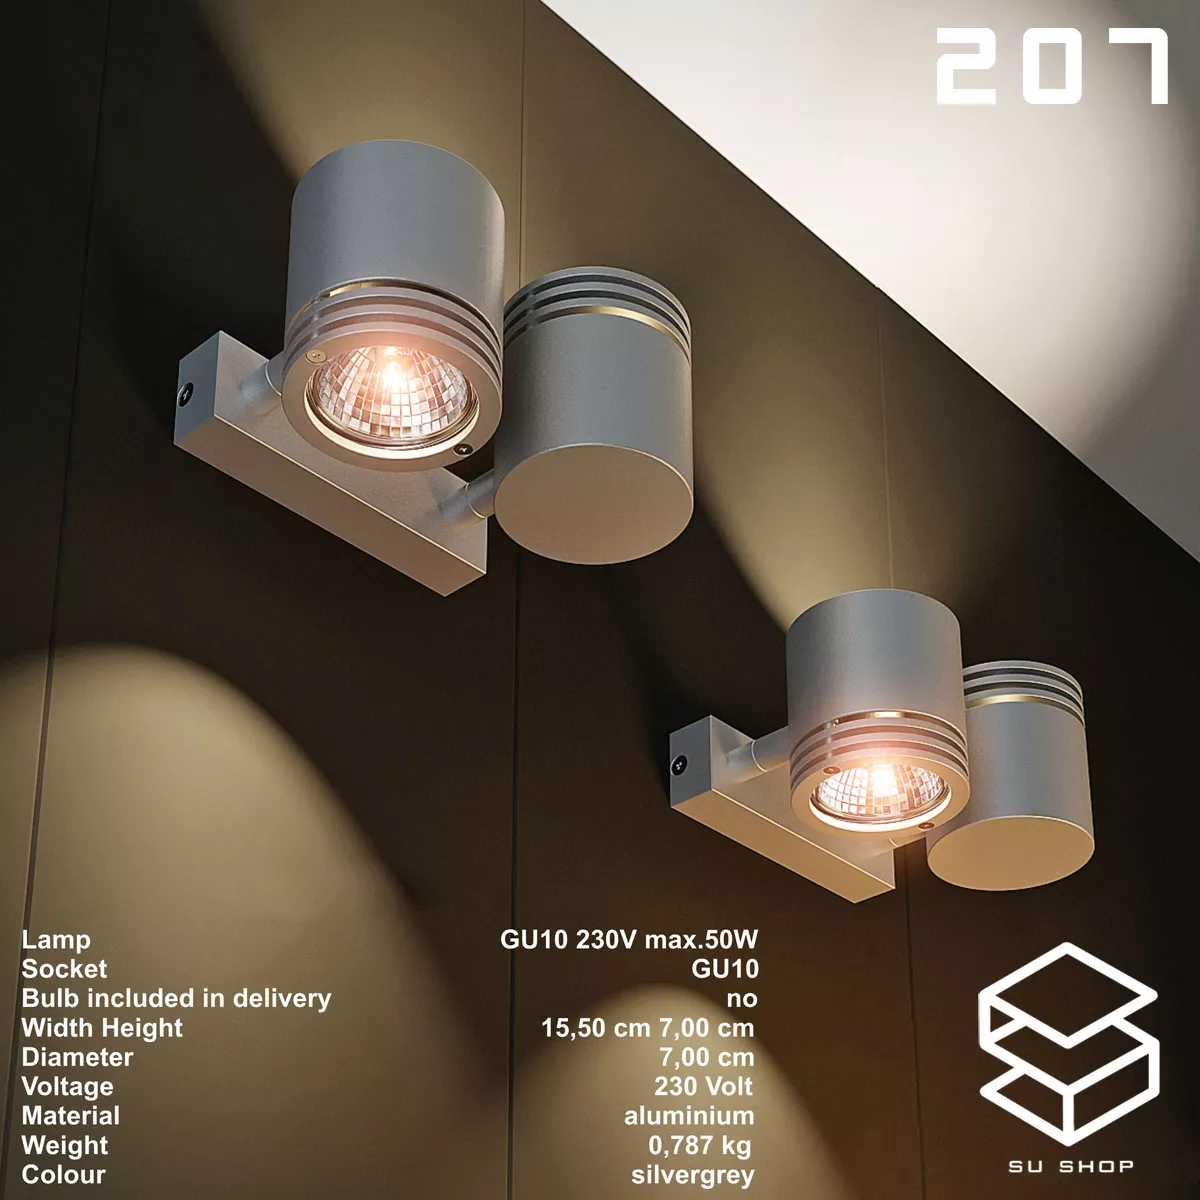 MODERN WALL LAMP - SKETCHUP 3D MODEL - VRAY OR ENSCAPE - ID16228